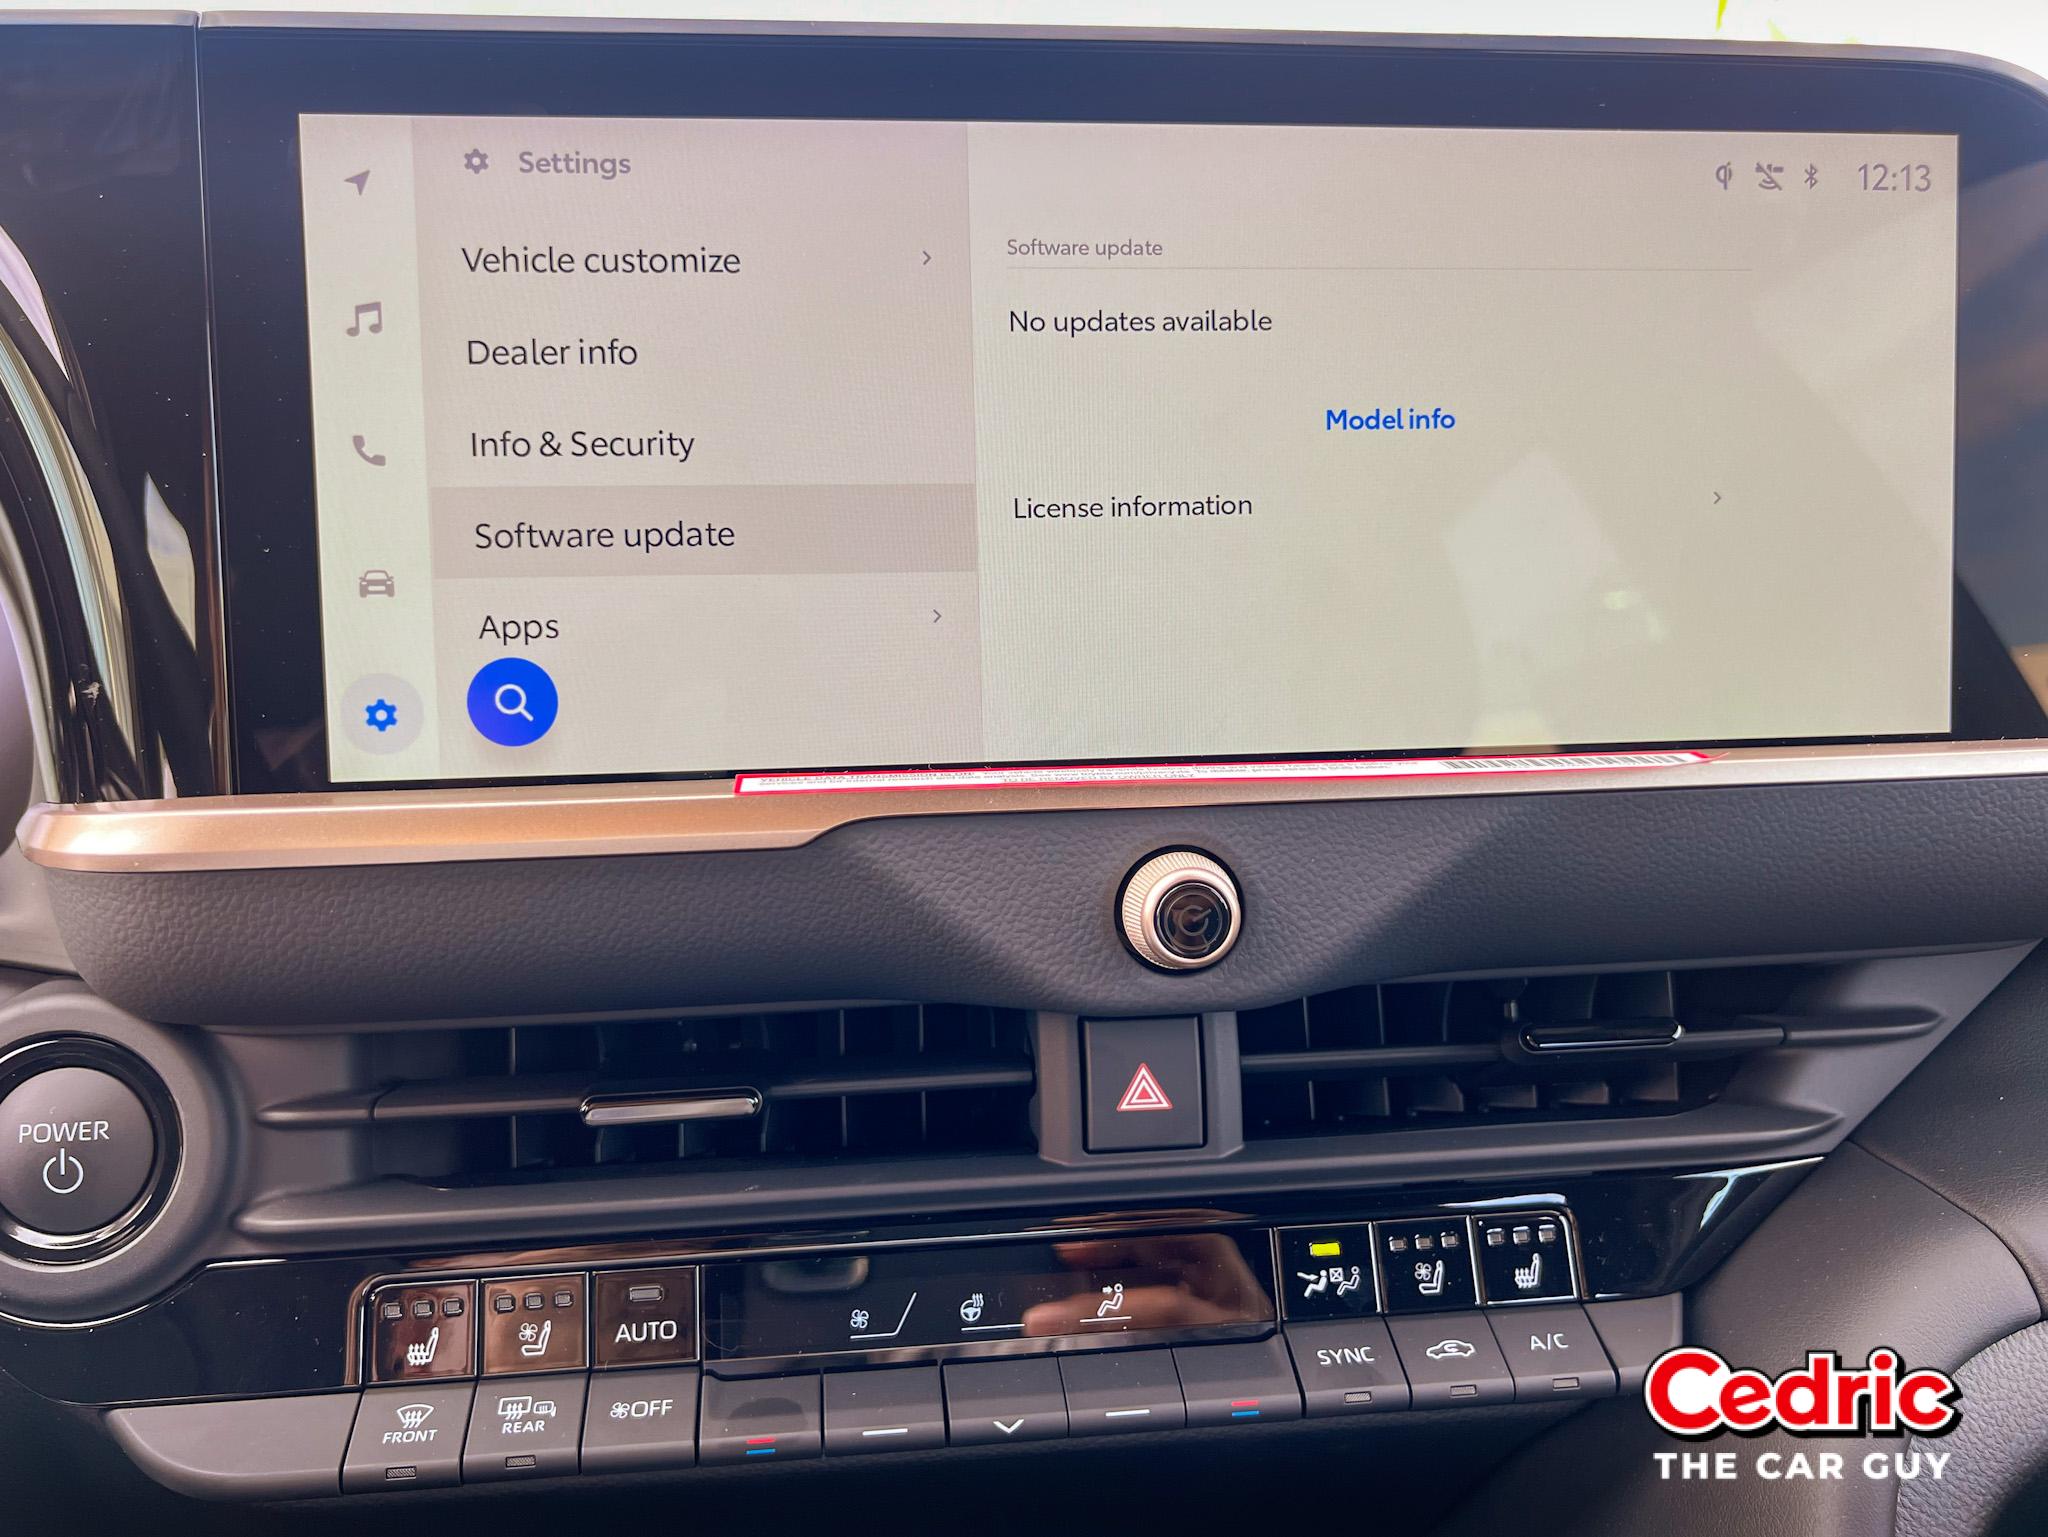 Toyota Software Update OTA Over-The-Air